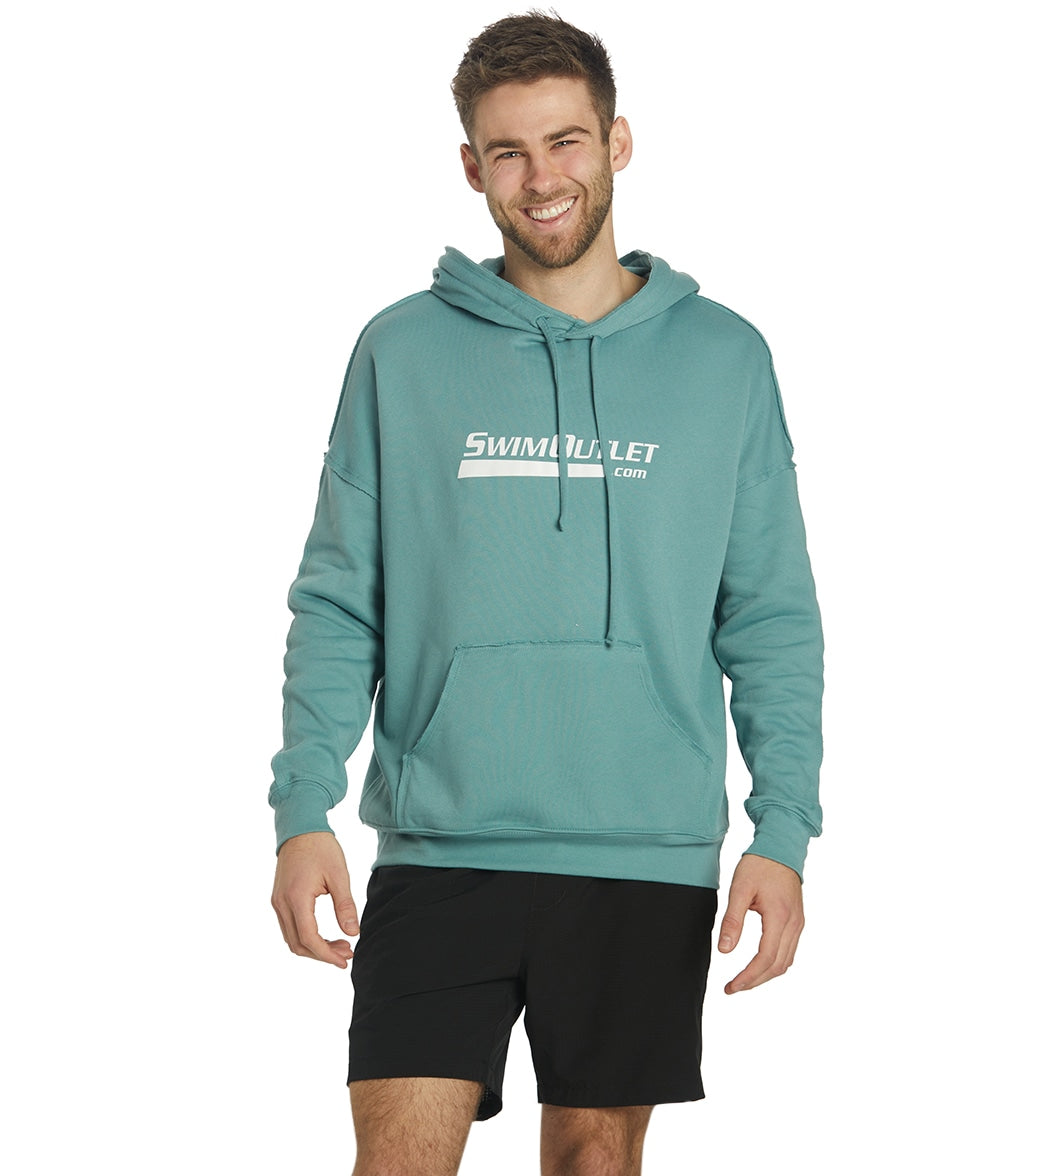 SwimOutlet Limited Edition Men's Hoodie